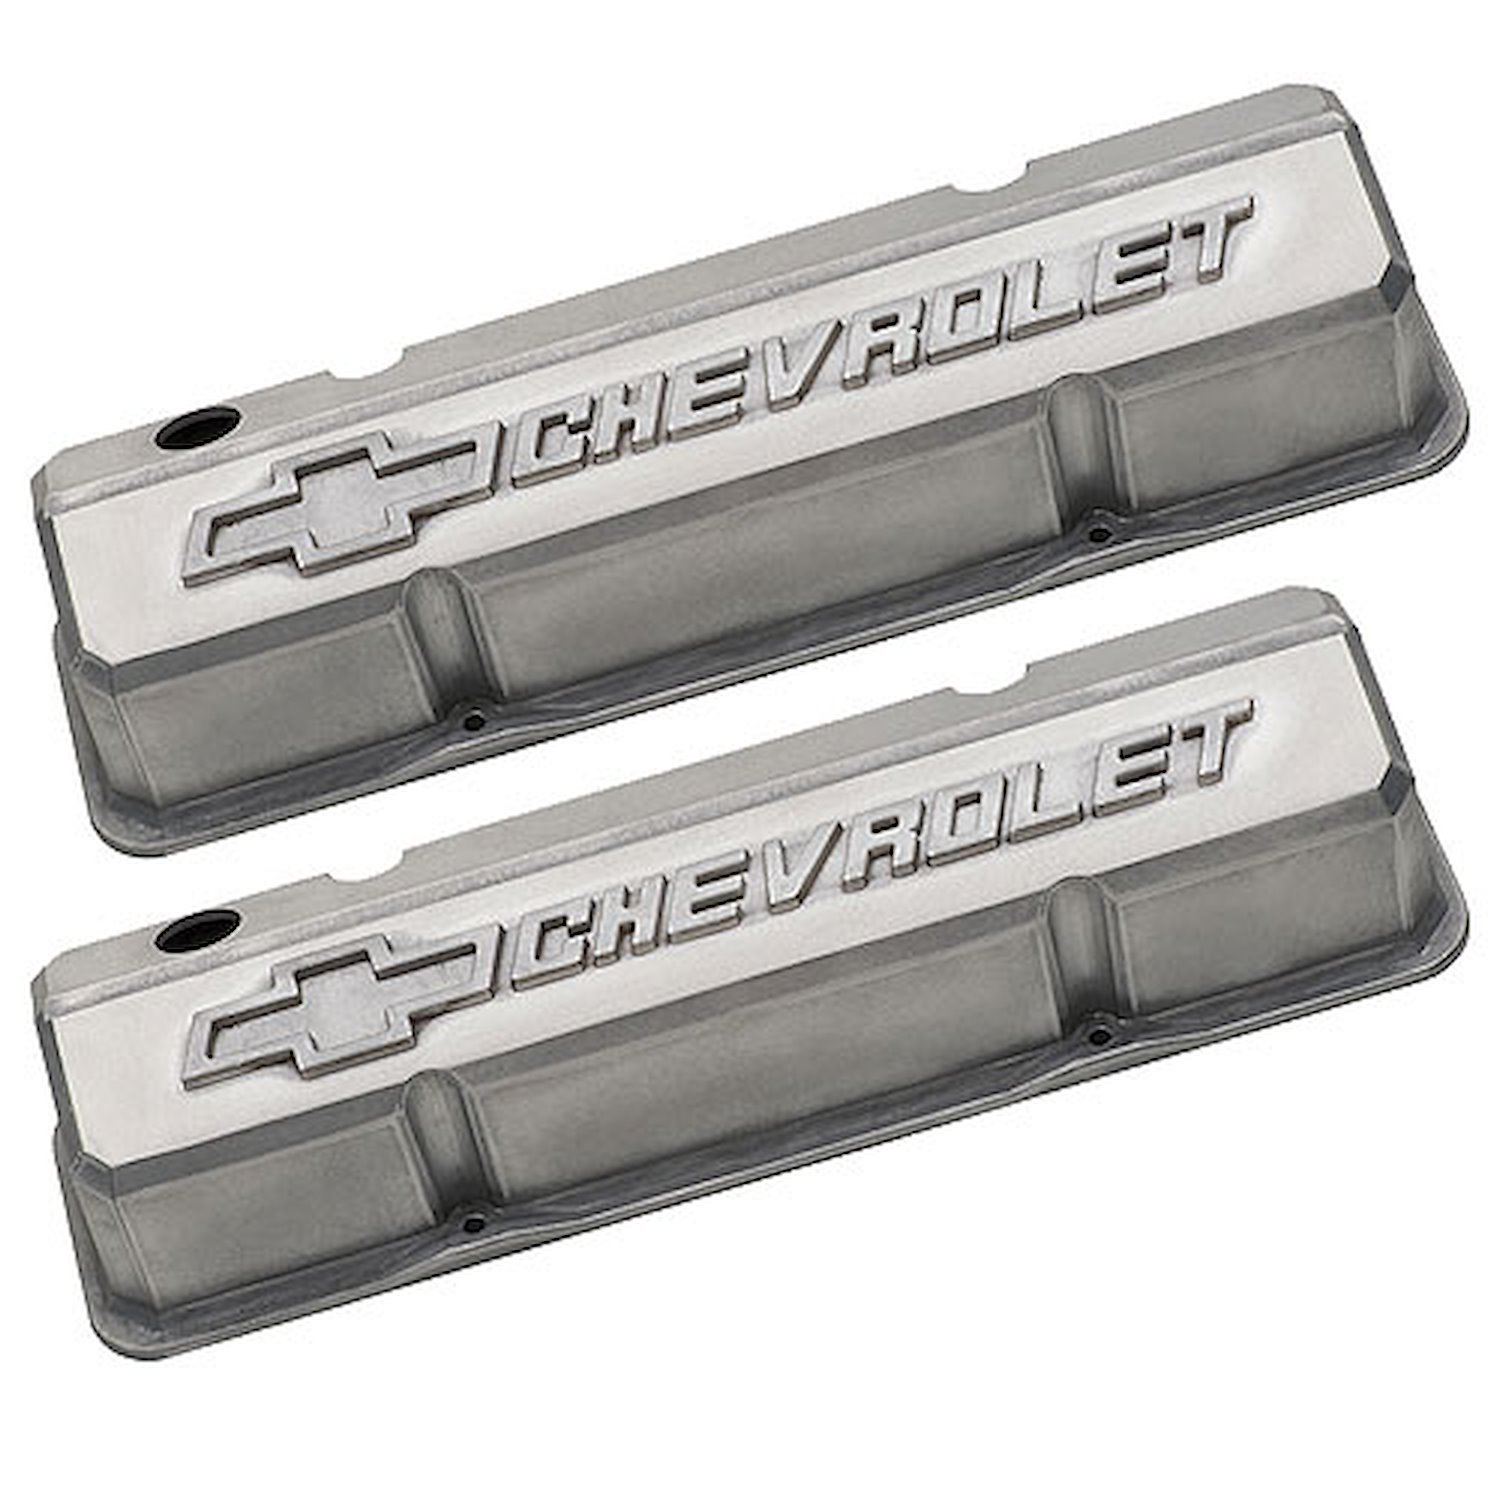 Die-Cast Slant-Edge Valve Covers for 1958-1986 Small Block Chevy with Chevrolet/Bowtie Raised Emblem in Natural As-Cast Finish